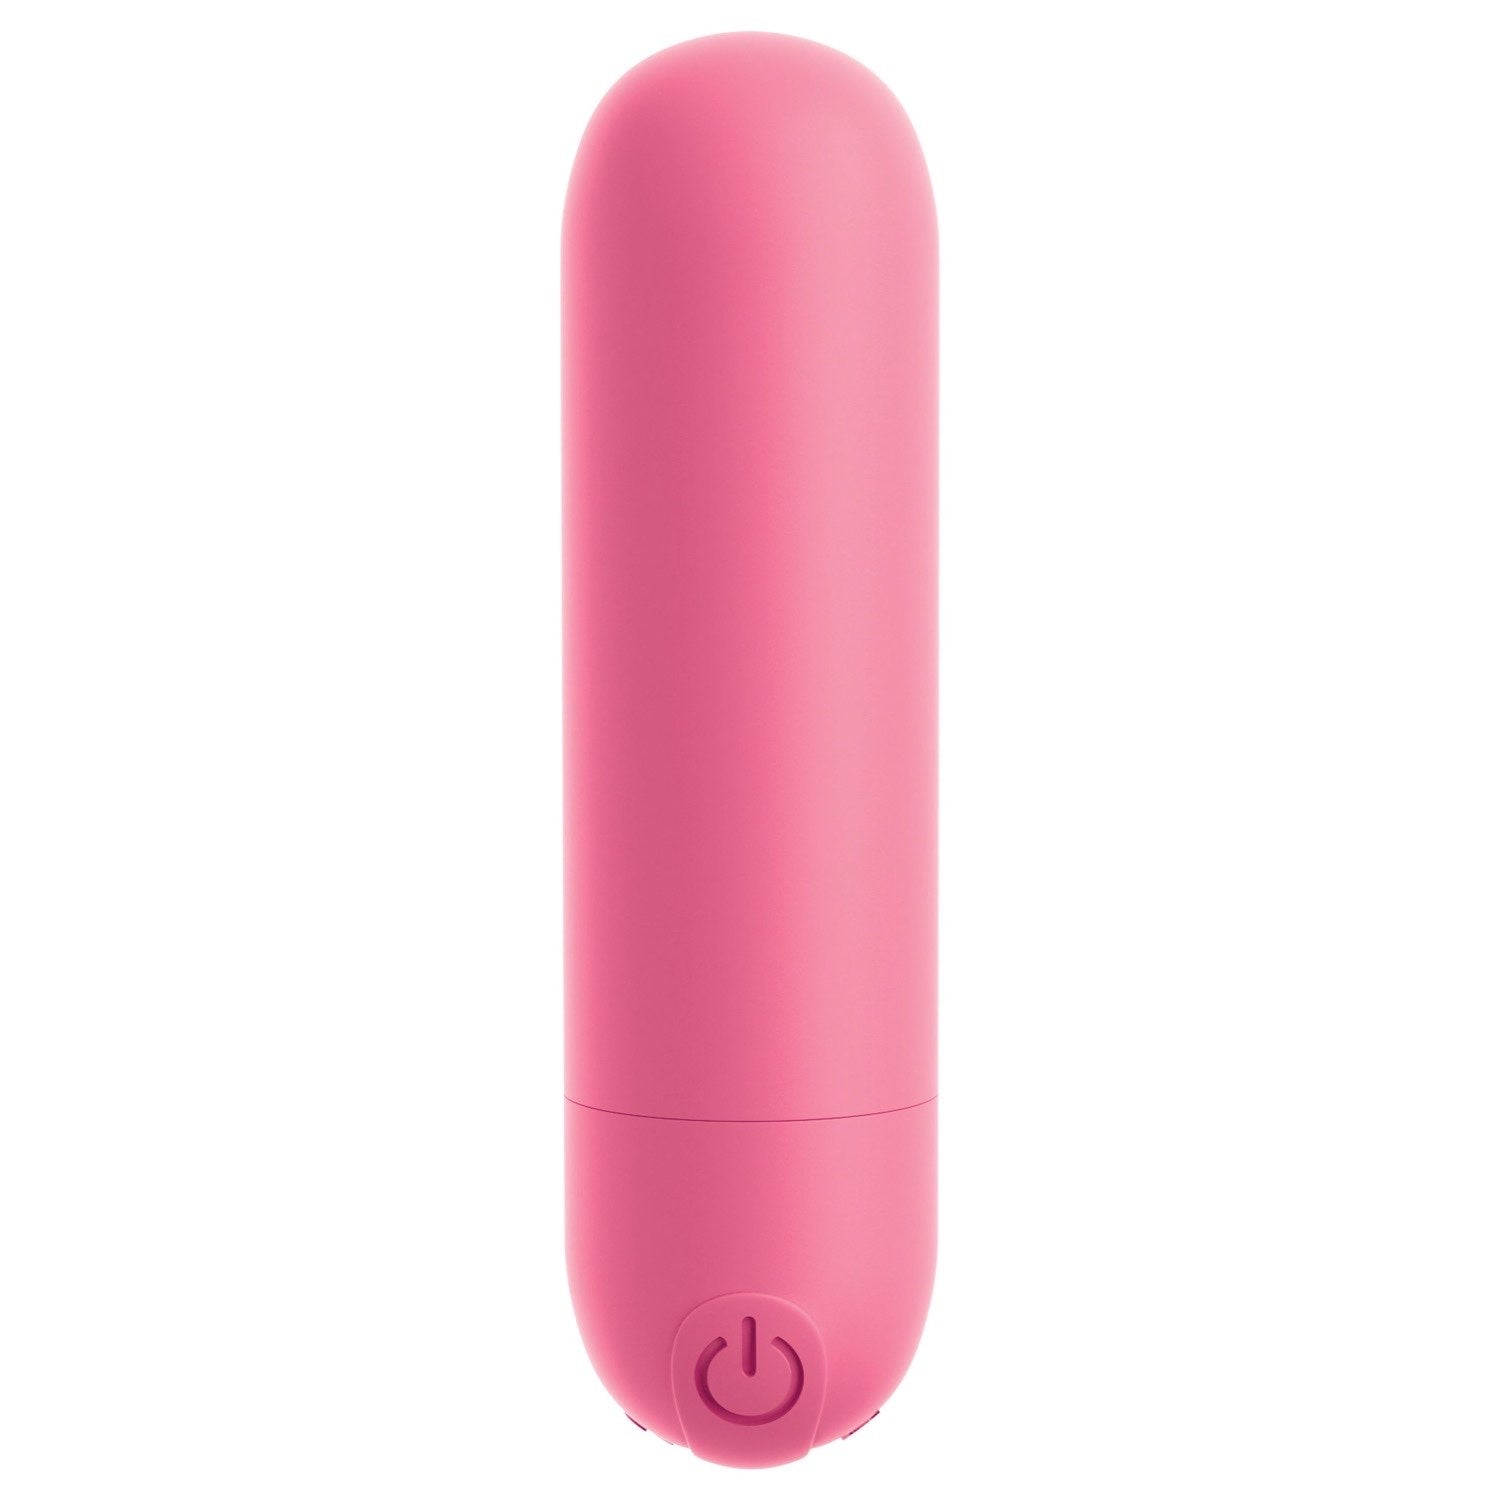 Omg Omg Bullets Play Pink Usb Rechargeable Bullet Fuchsia By